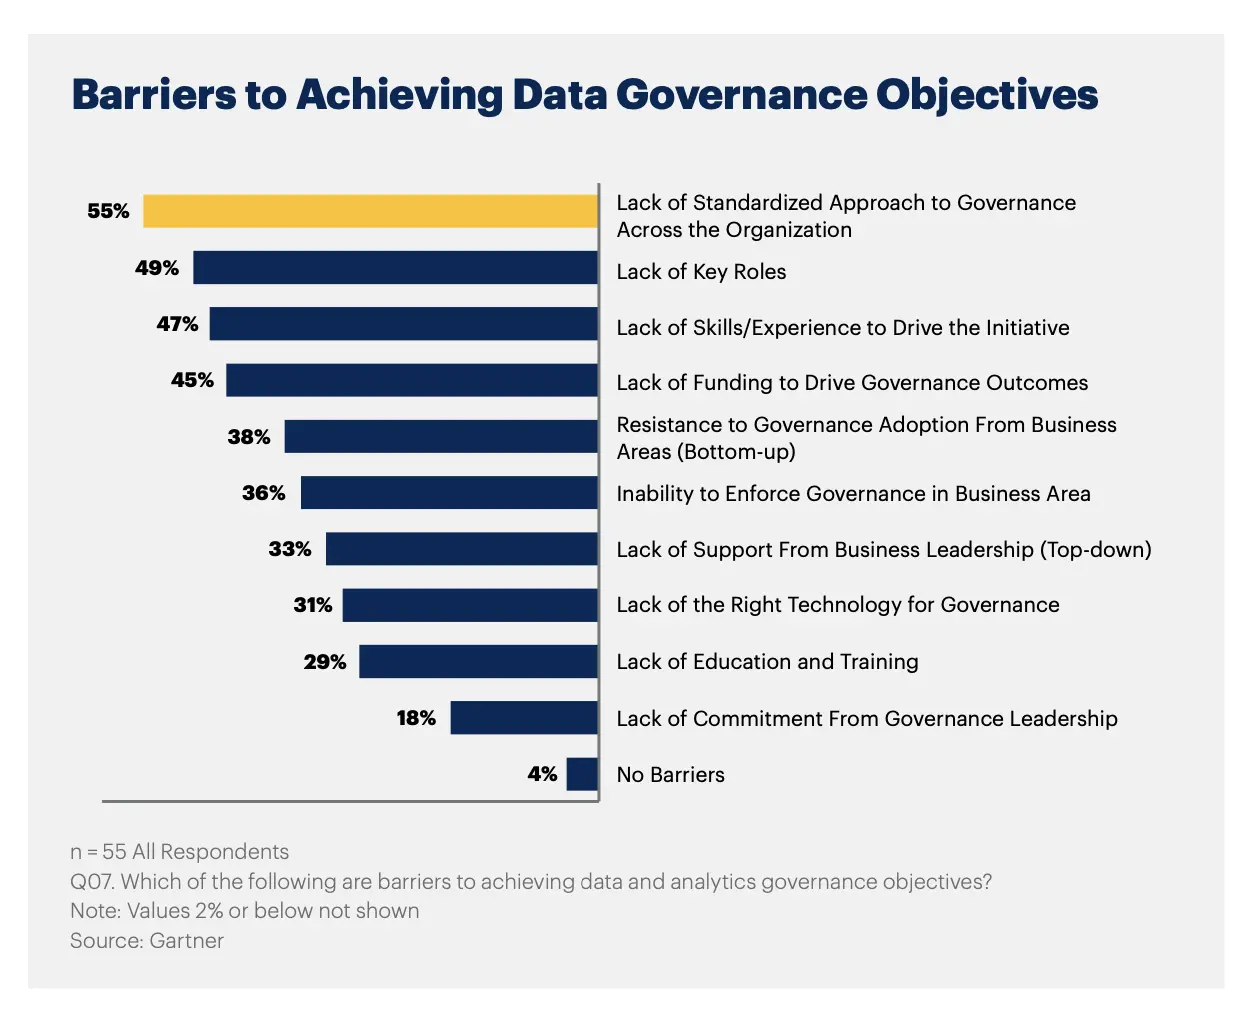 Top 10 barriers to achieving data governance objectives